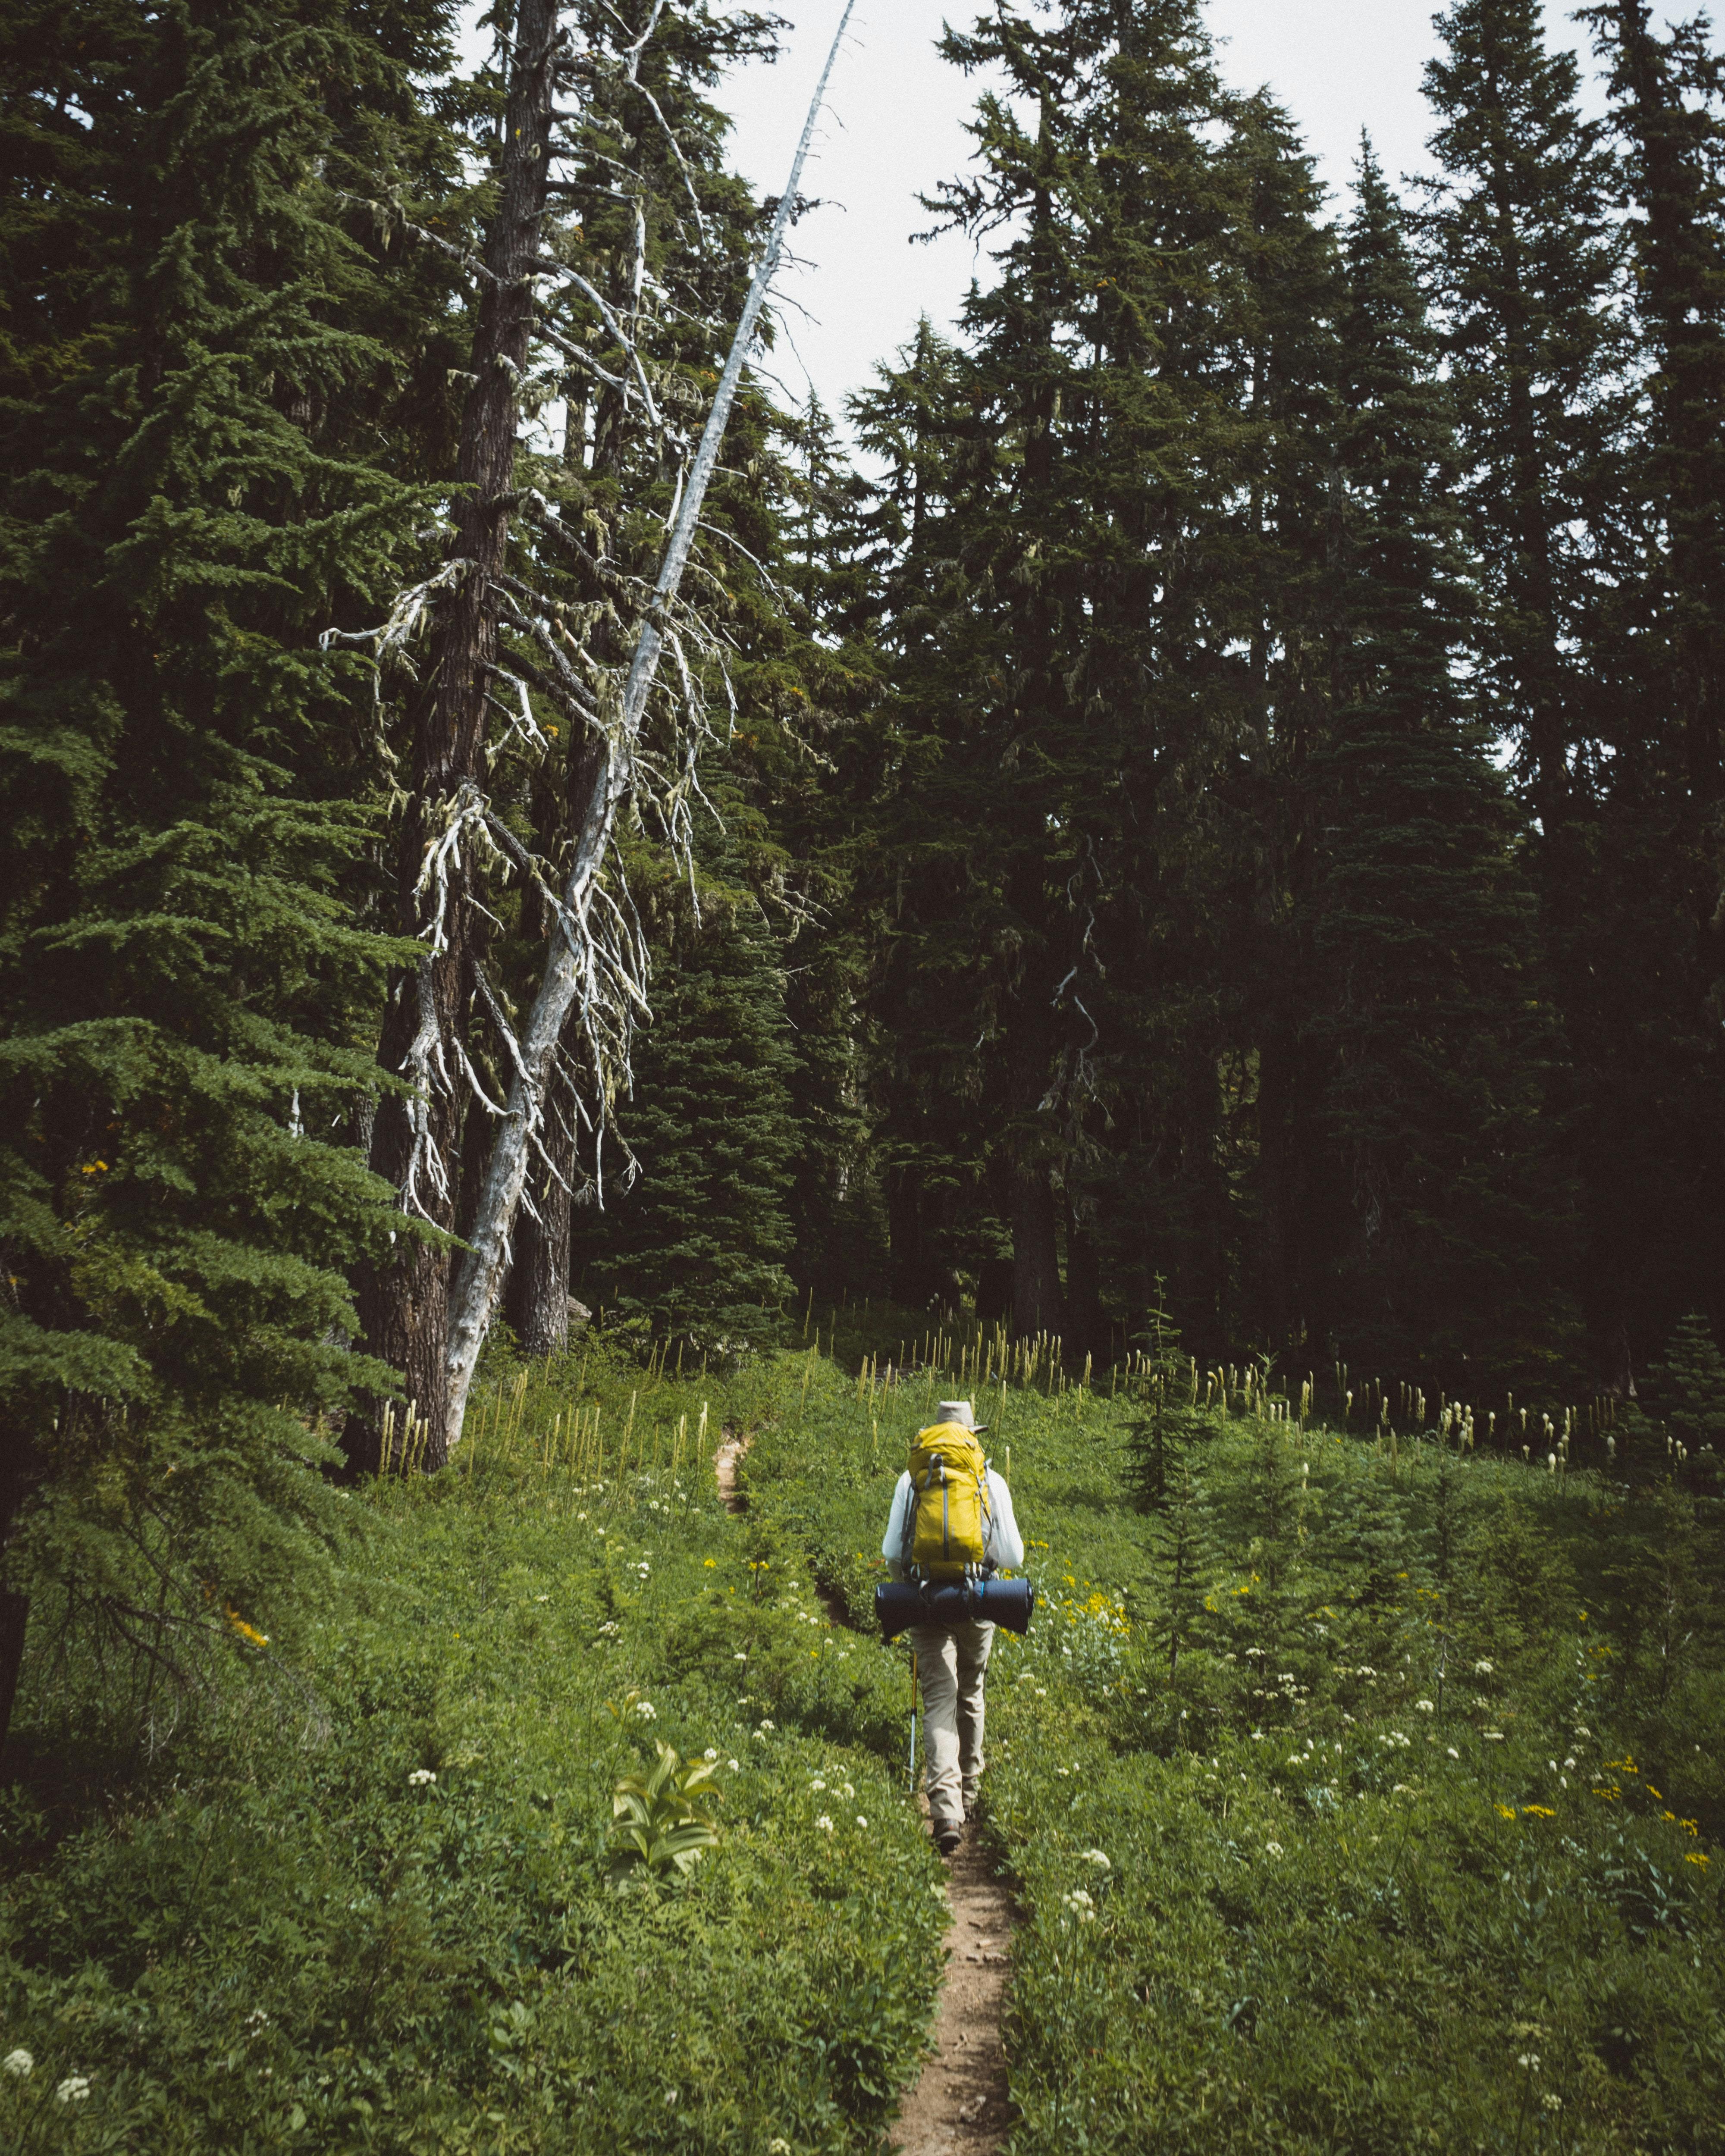 A hiker heading into a forest